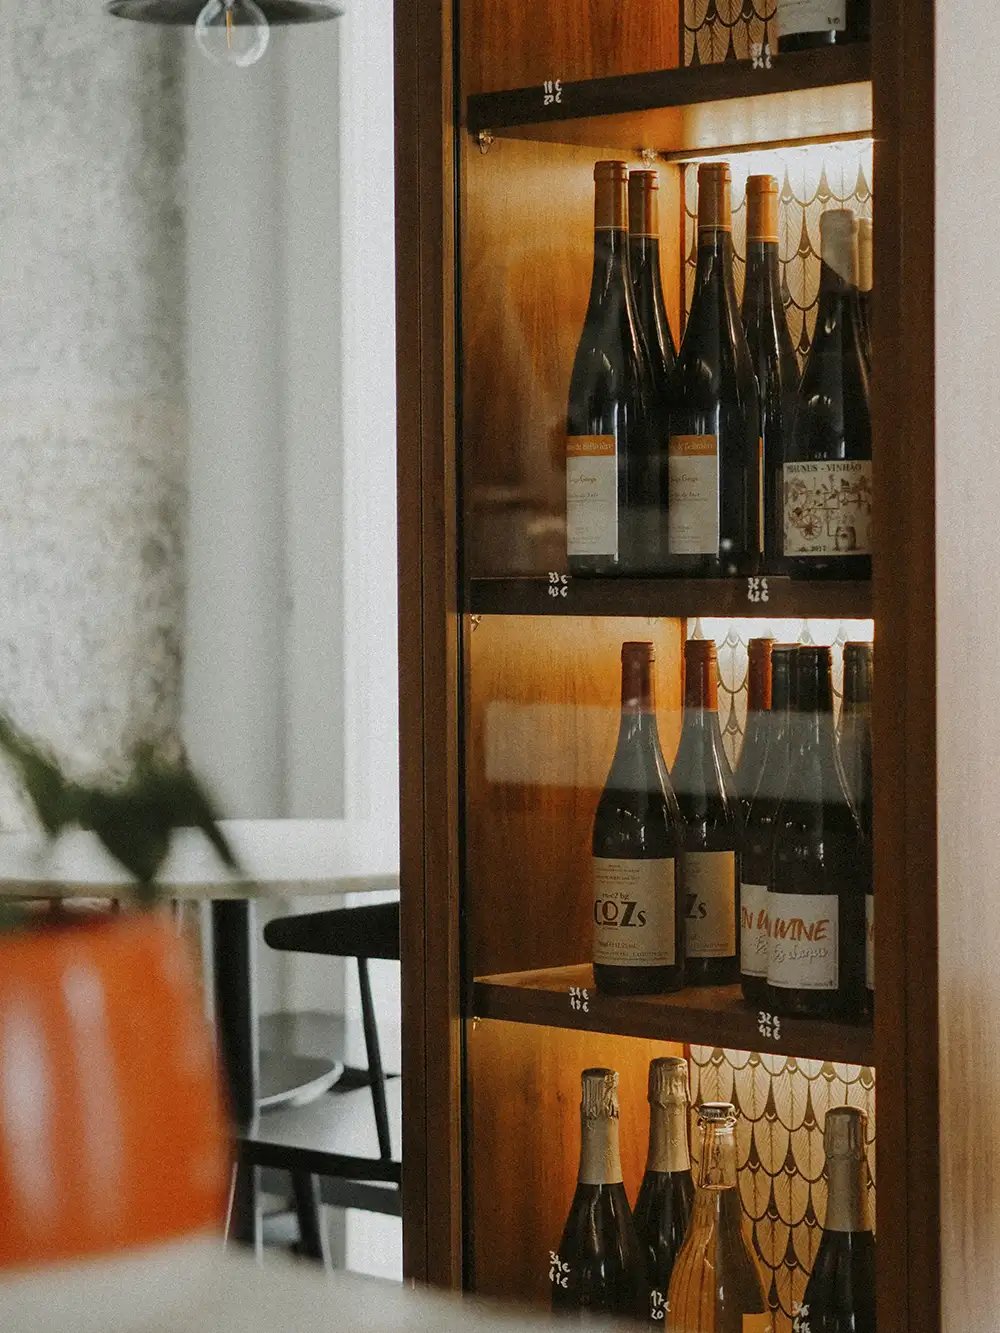 A wine cabinet at a restaurant